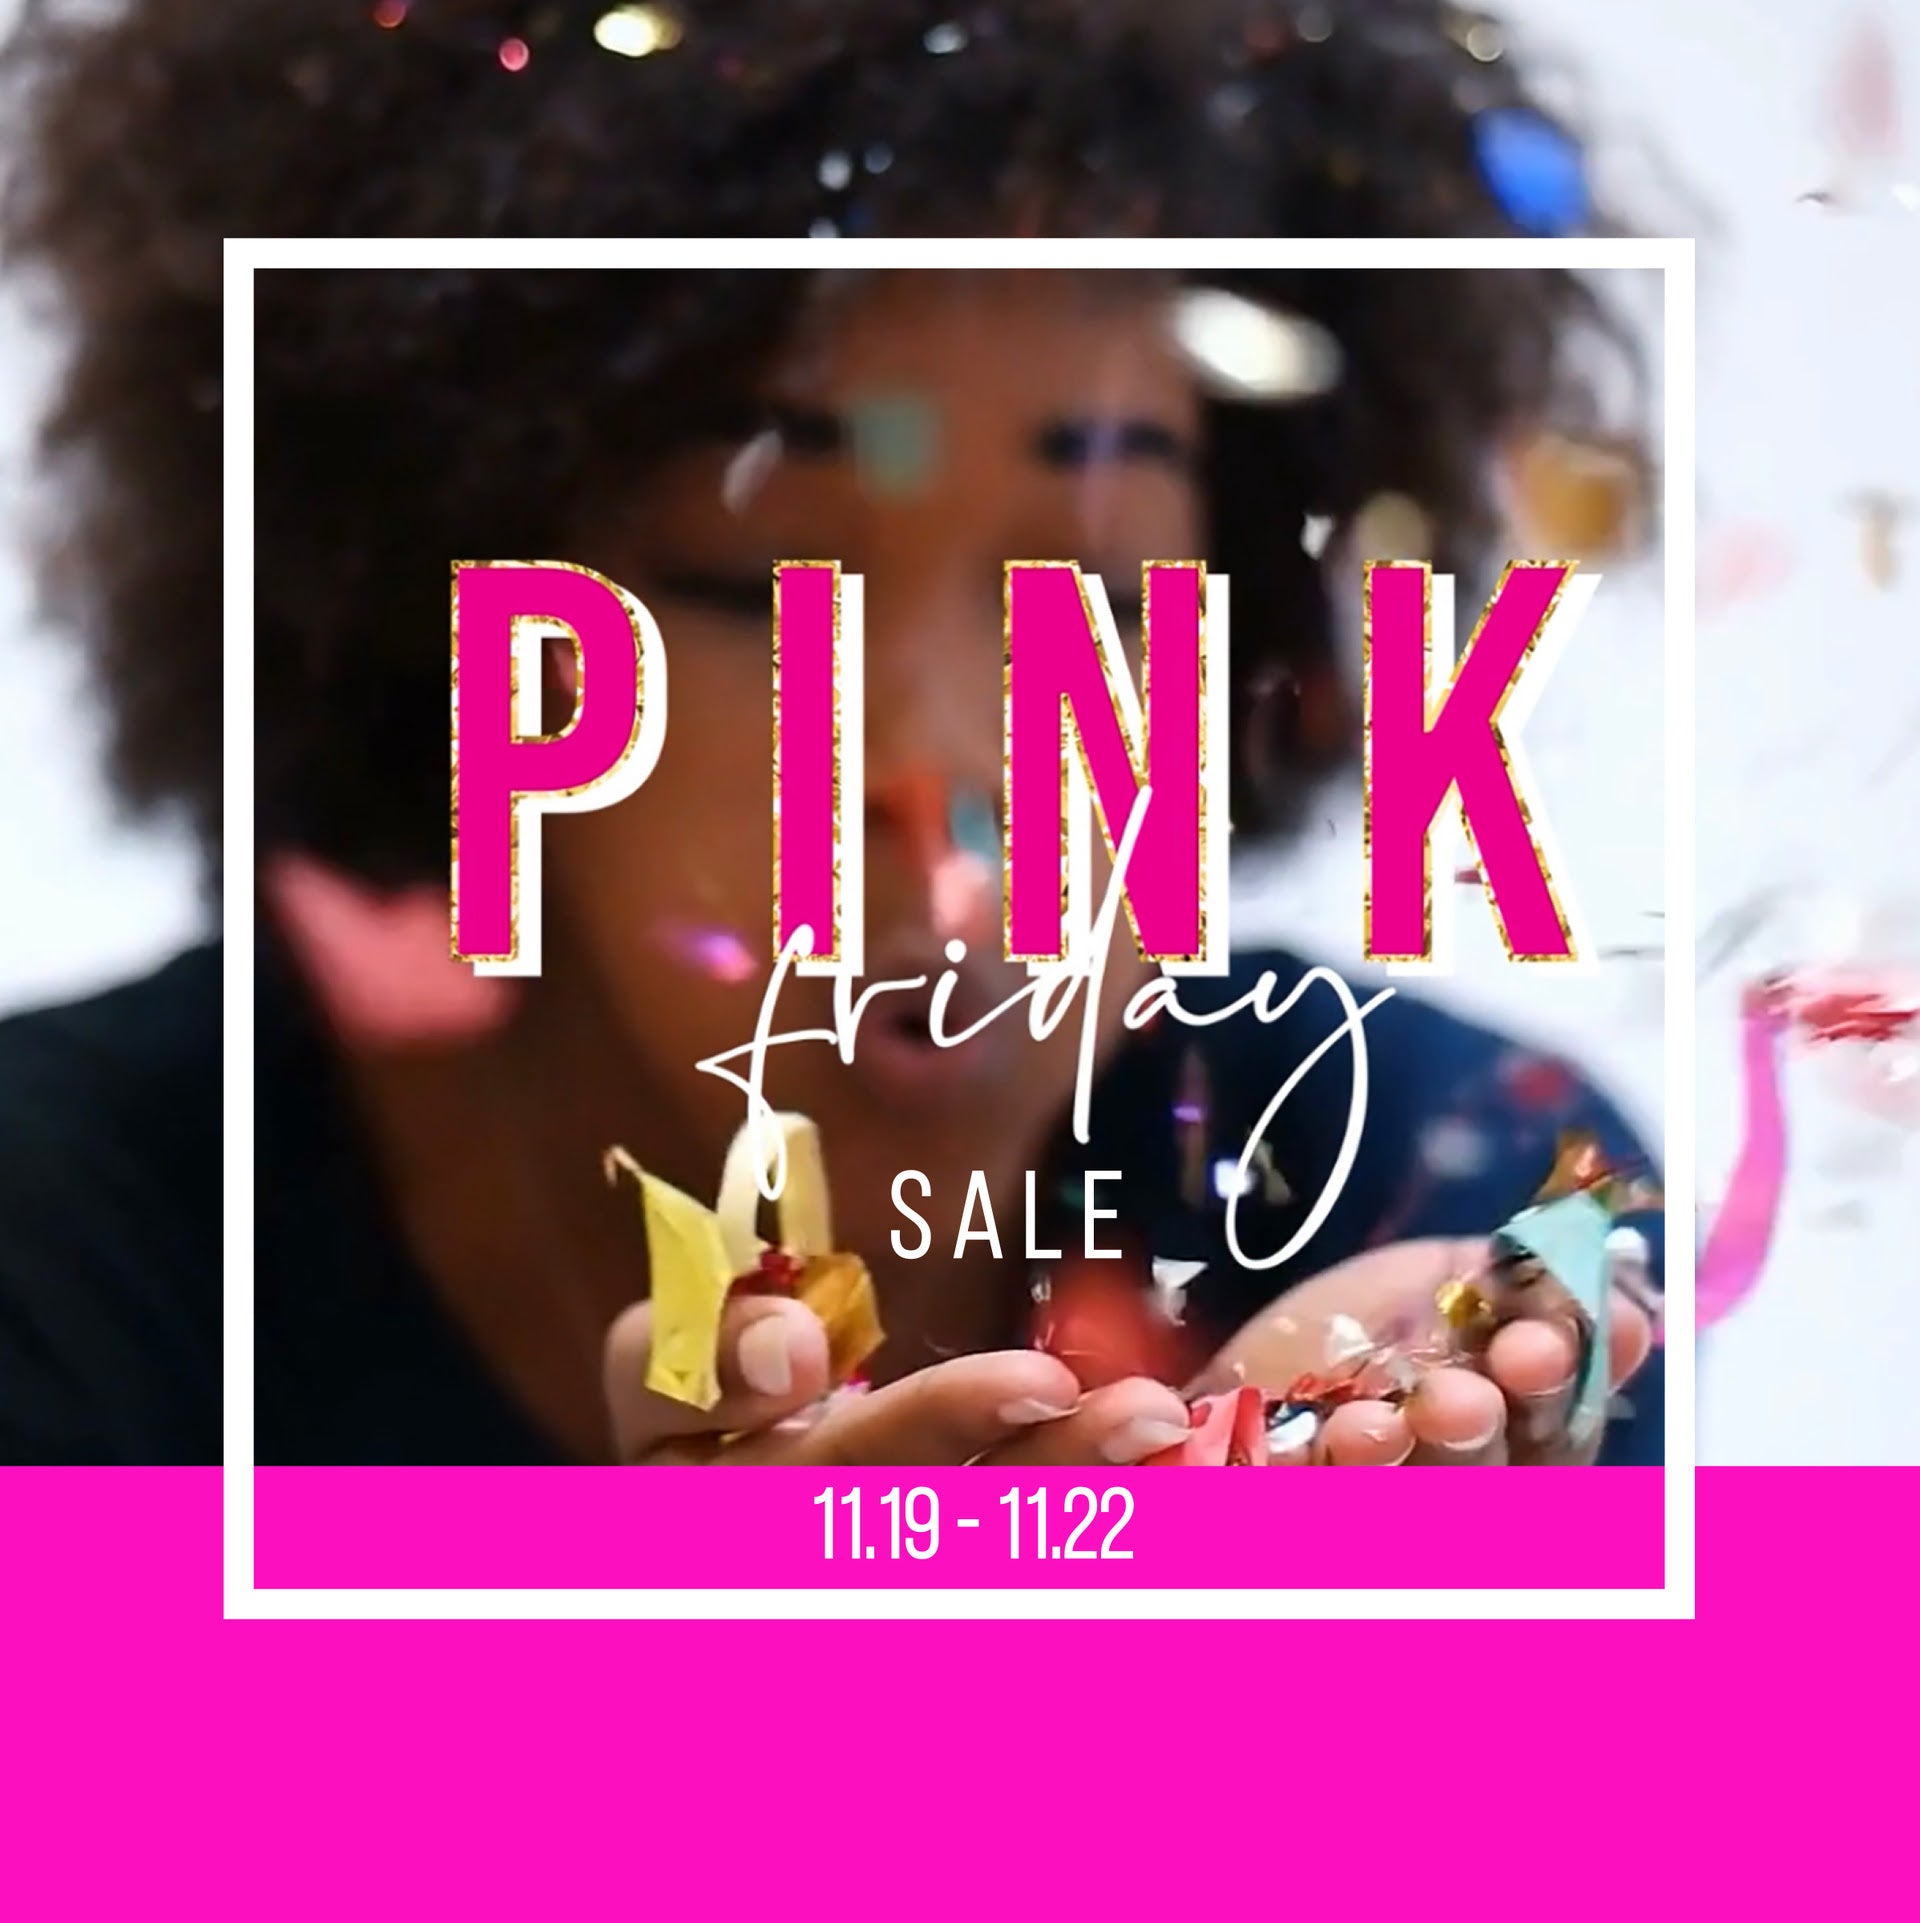 Pink Friday Is Just 1 Week Away! 💖